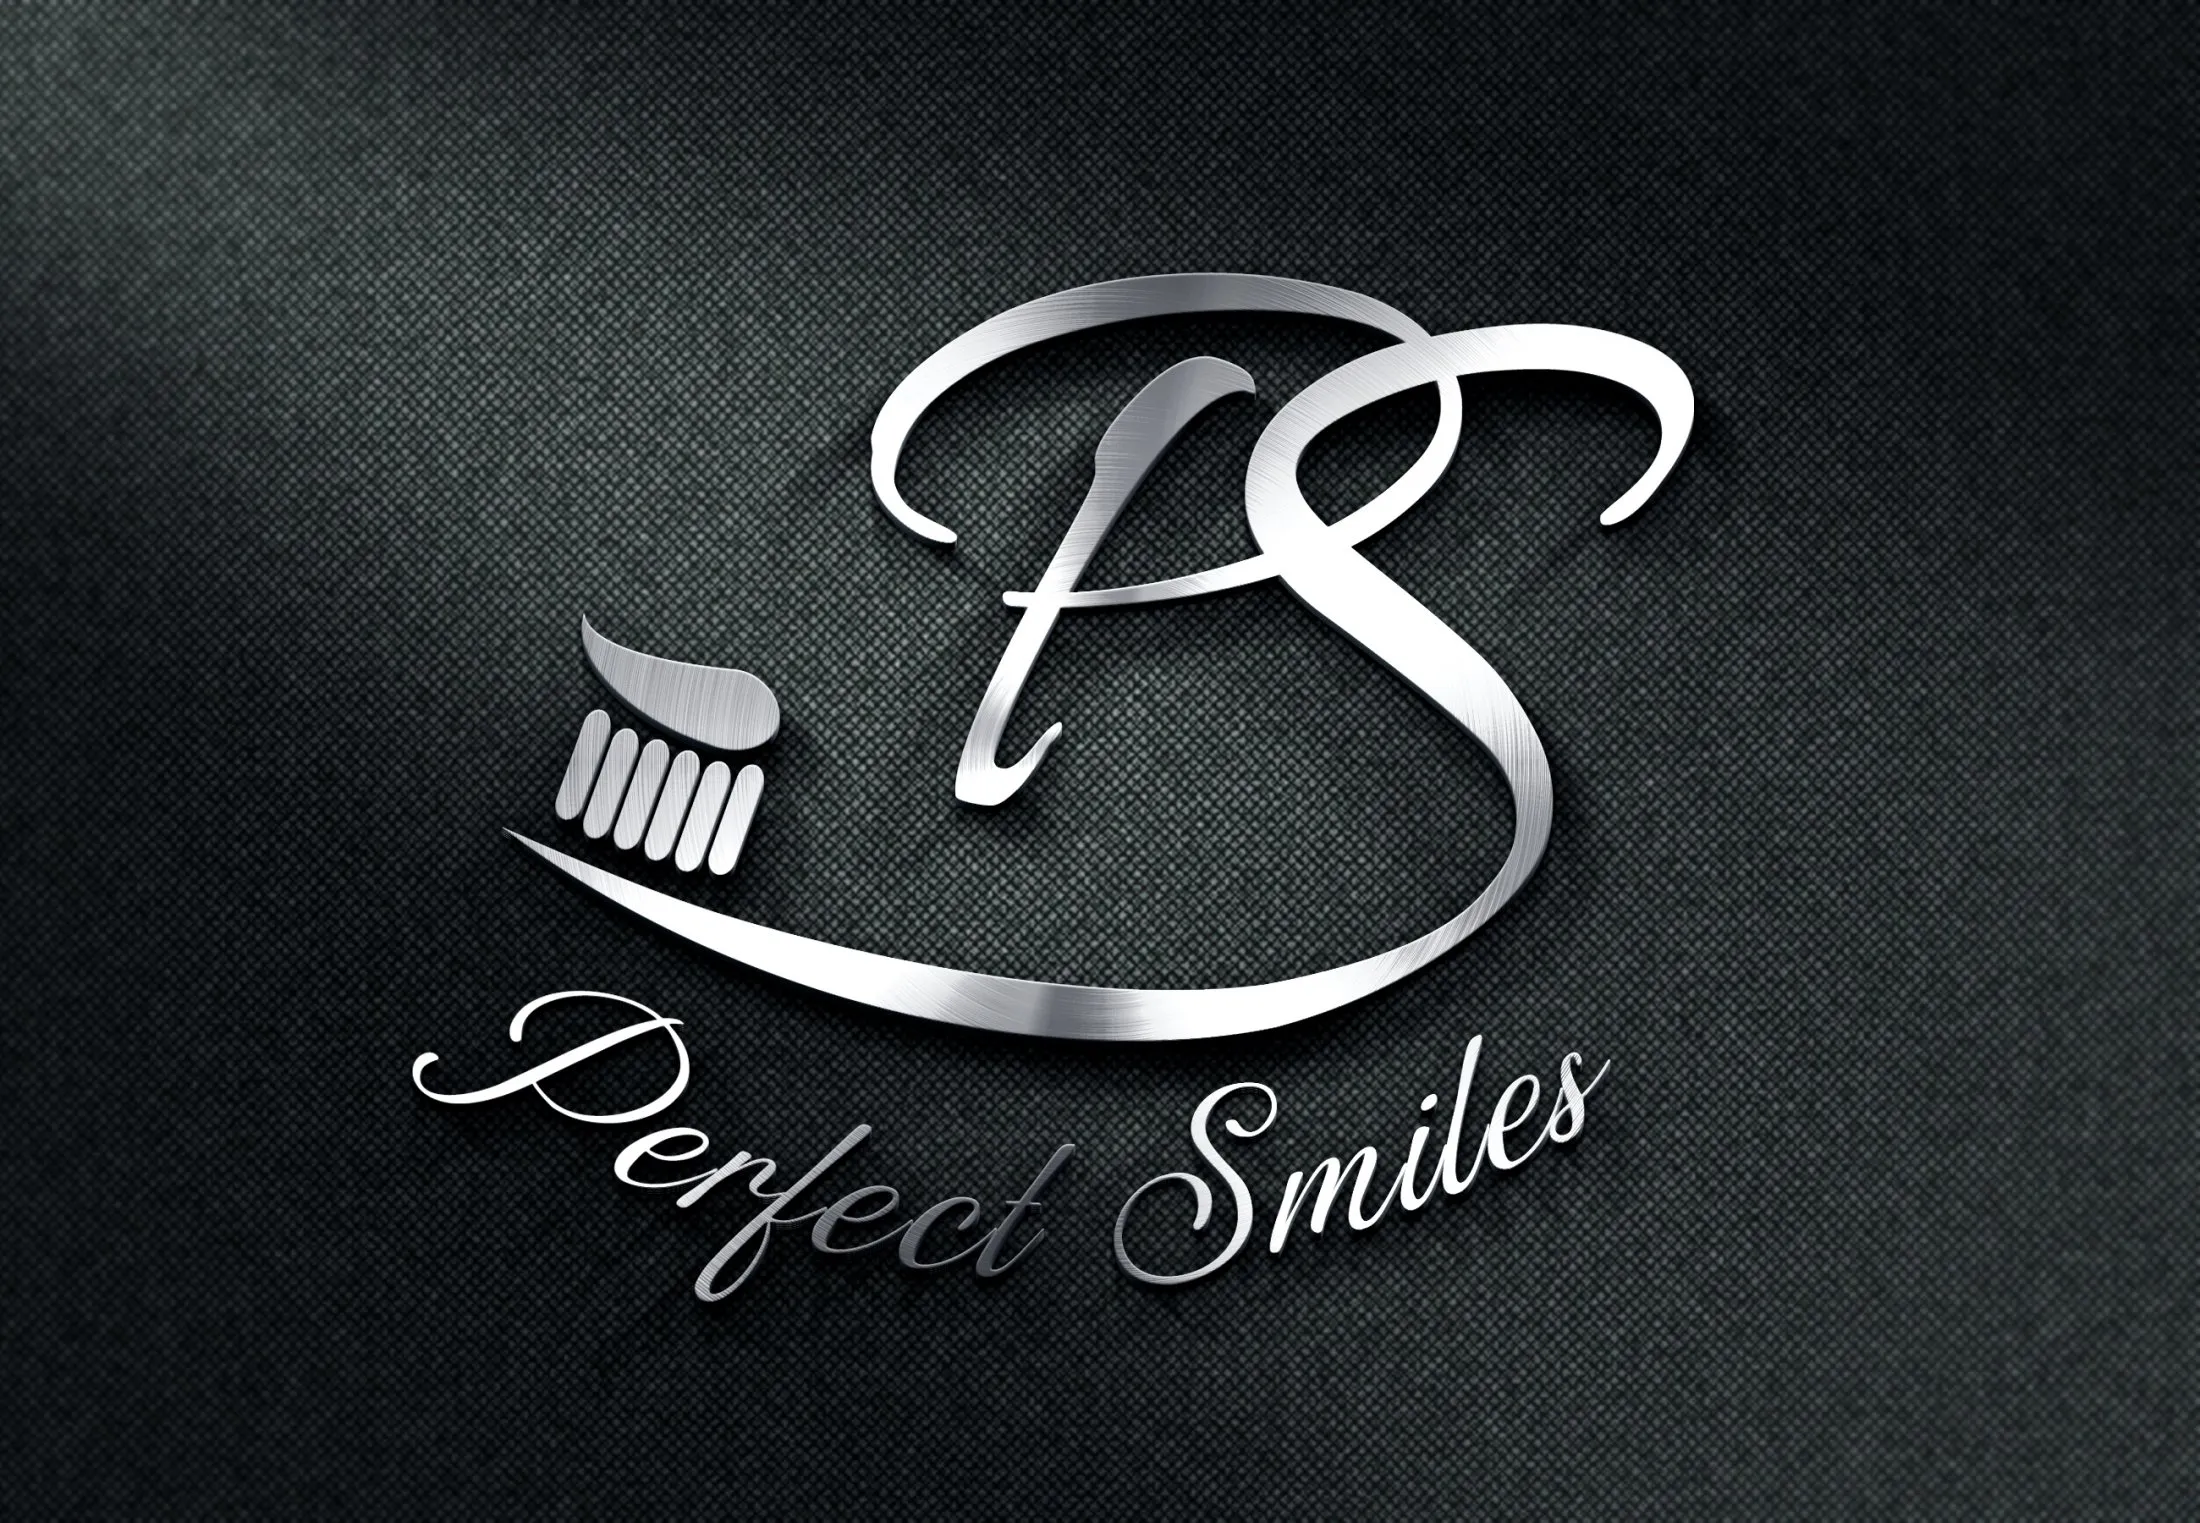 Link to Perfect Smiles home page